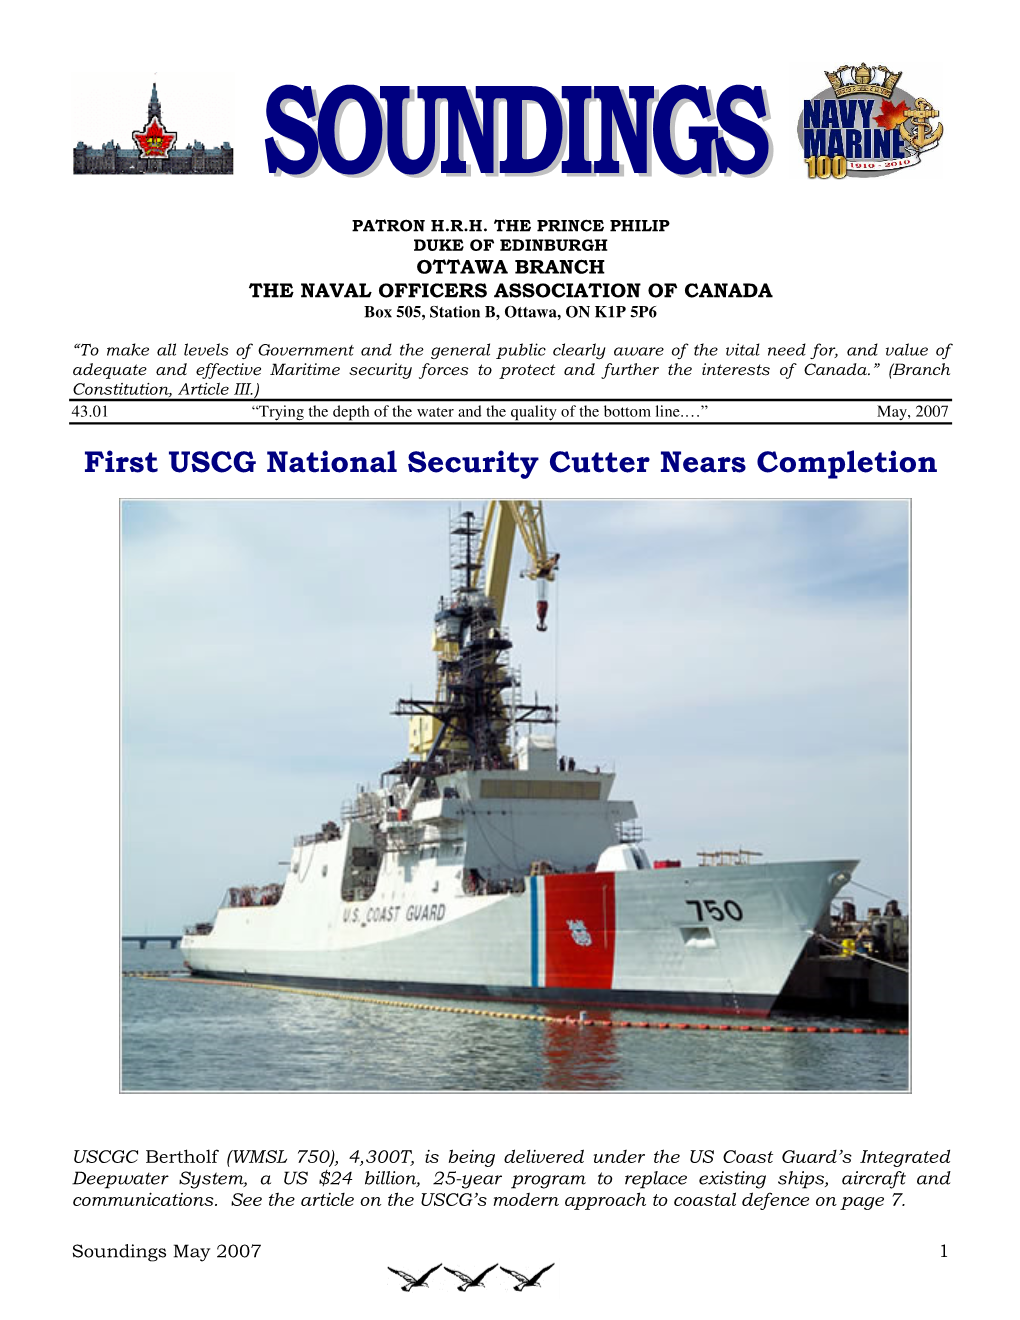 First USCG National Security Cutter Nears Completion